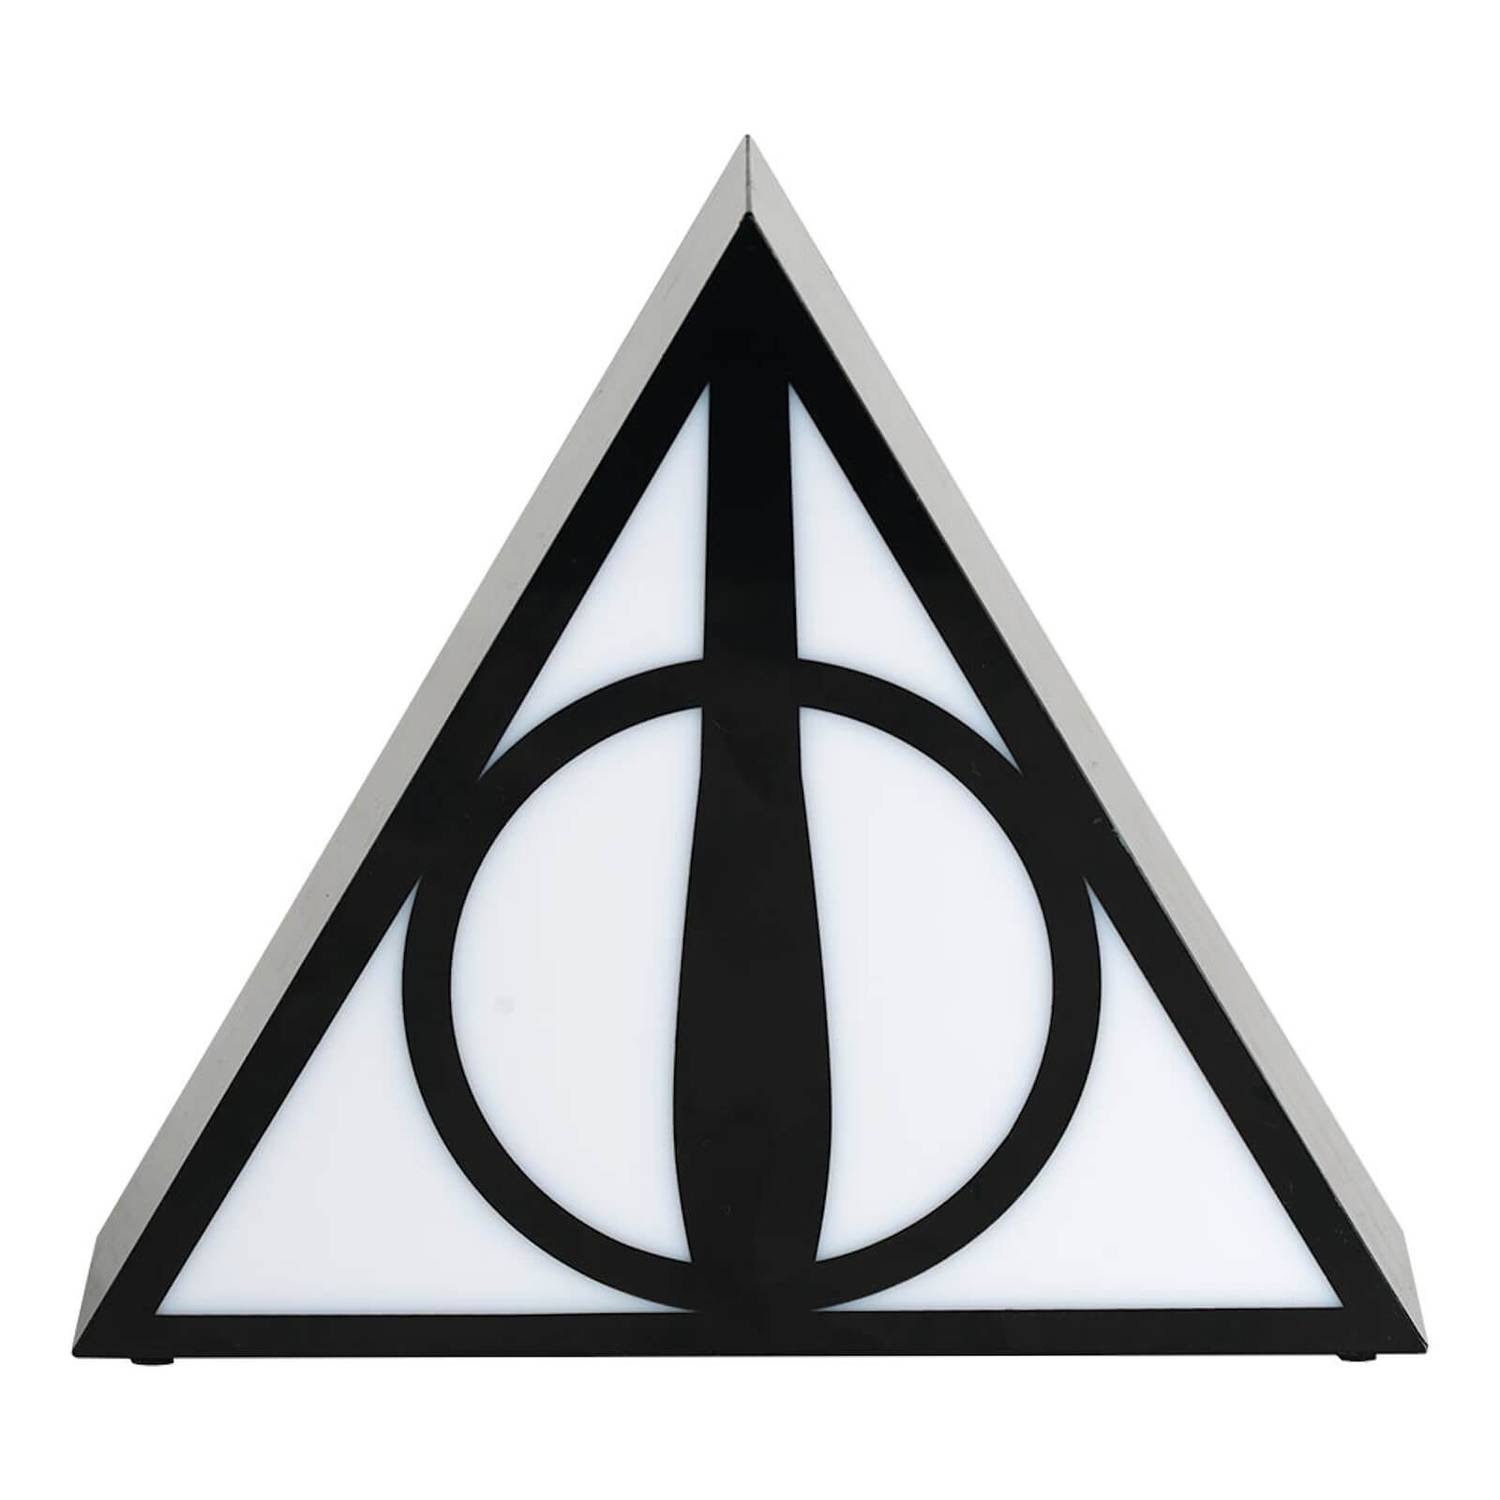 Harry Potter & The Deathly Hallows 8" Desk Lamp $13 + Free Shipping